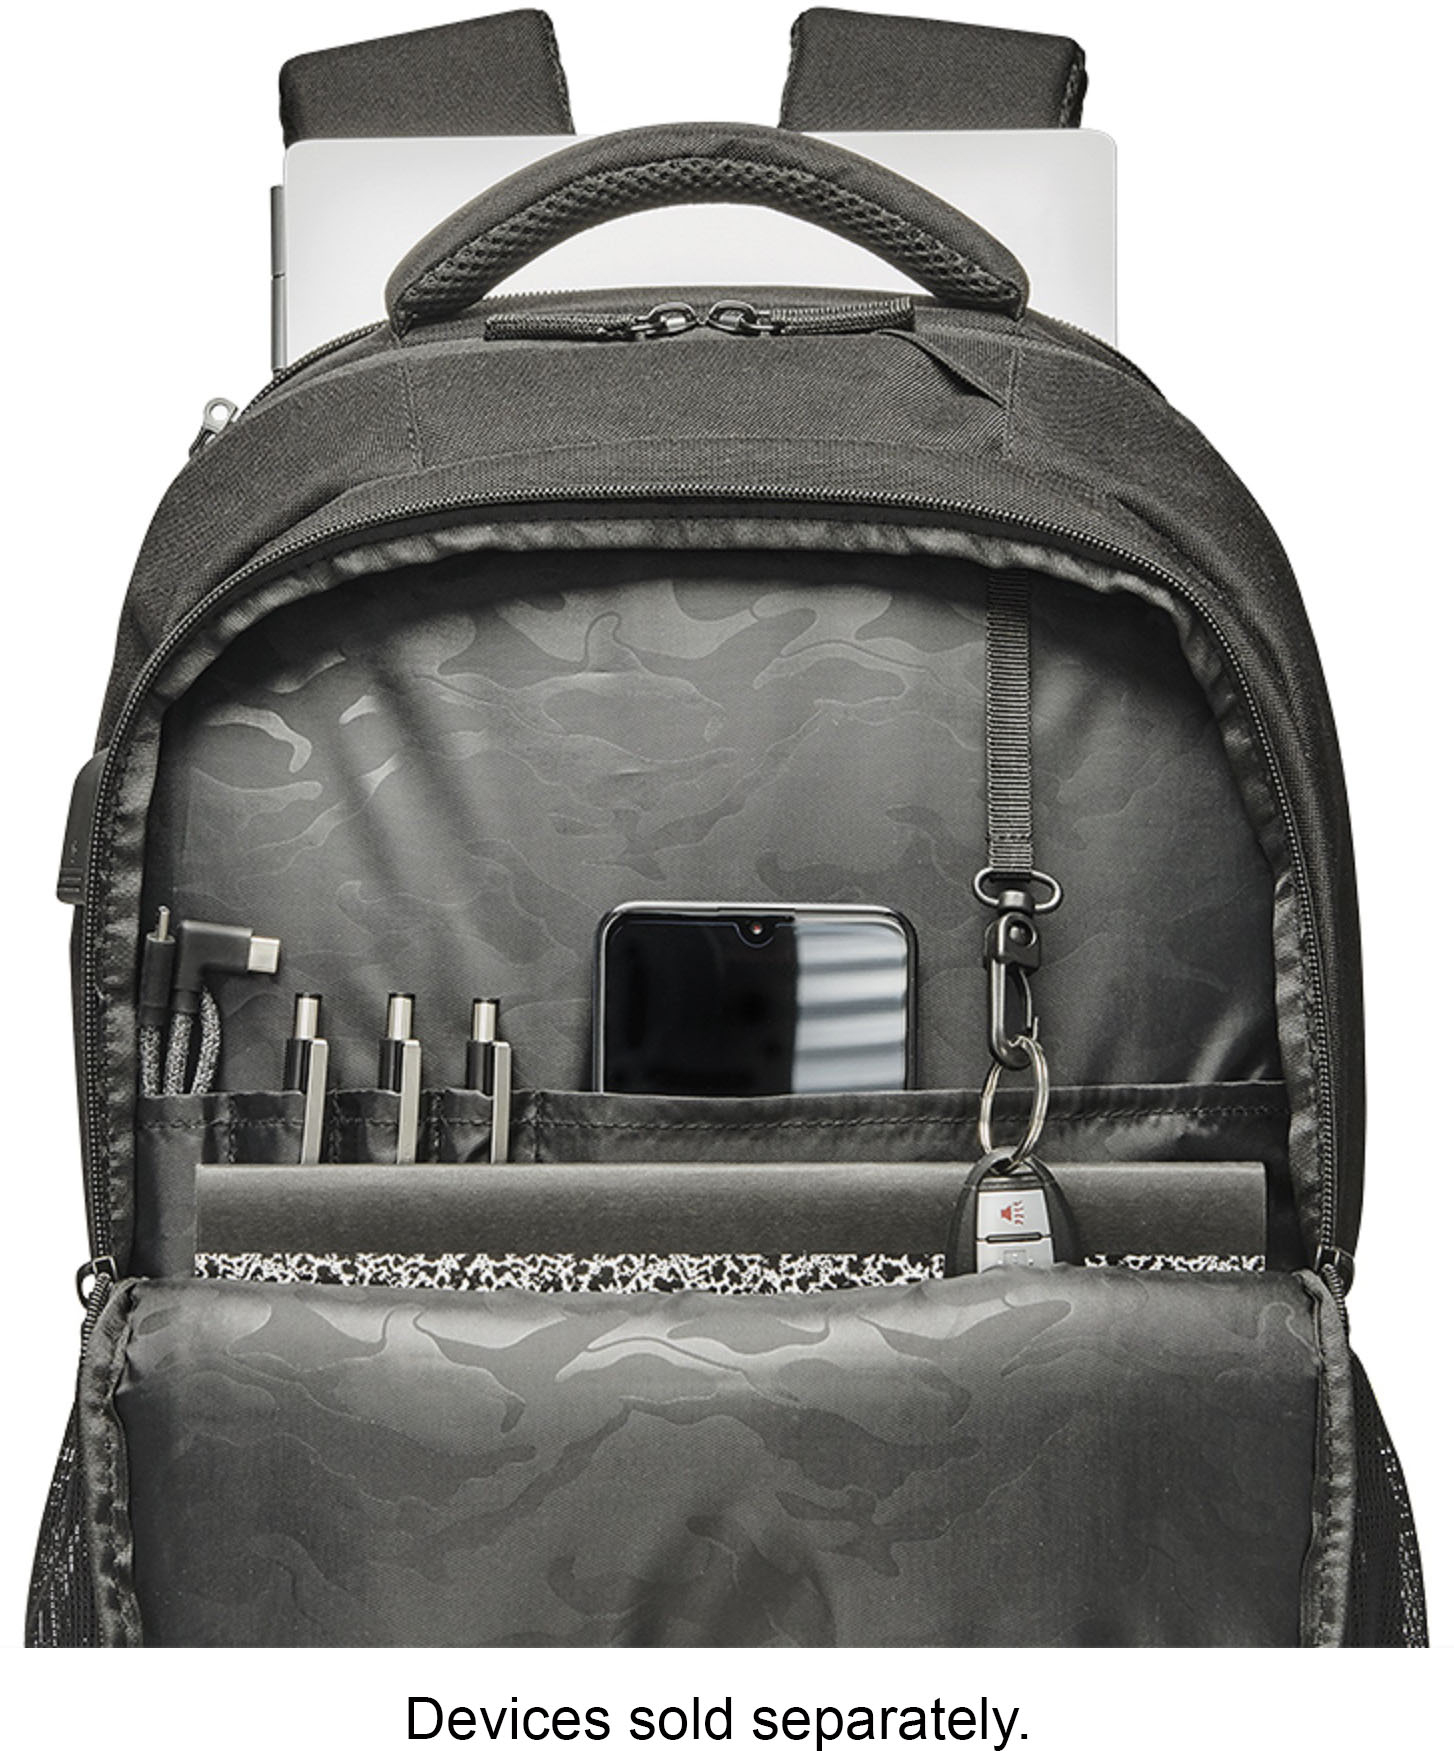 Solo New York Re:Define Recycled Backpack Black UBN708-4